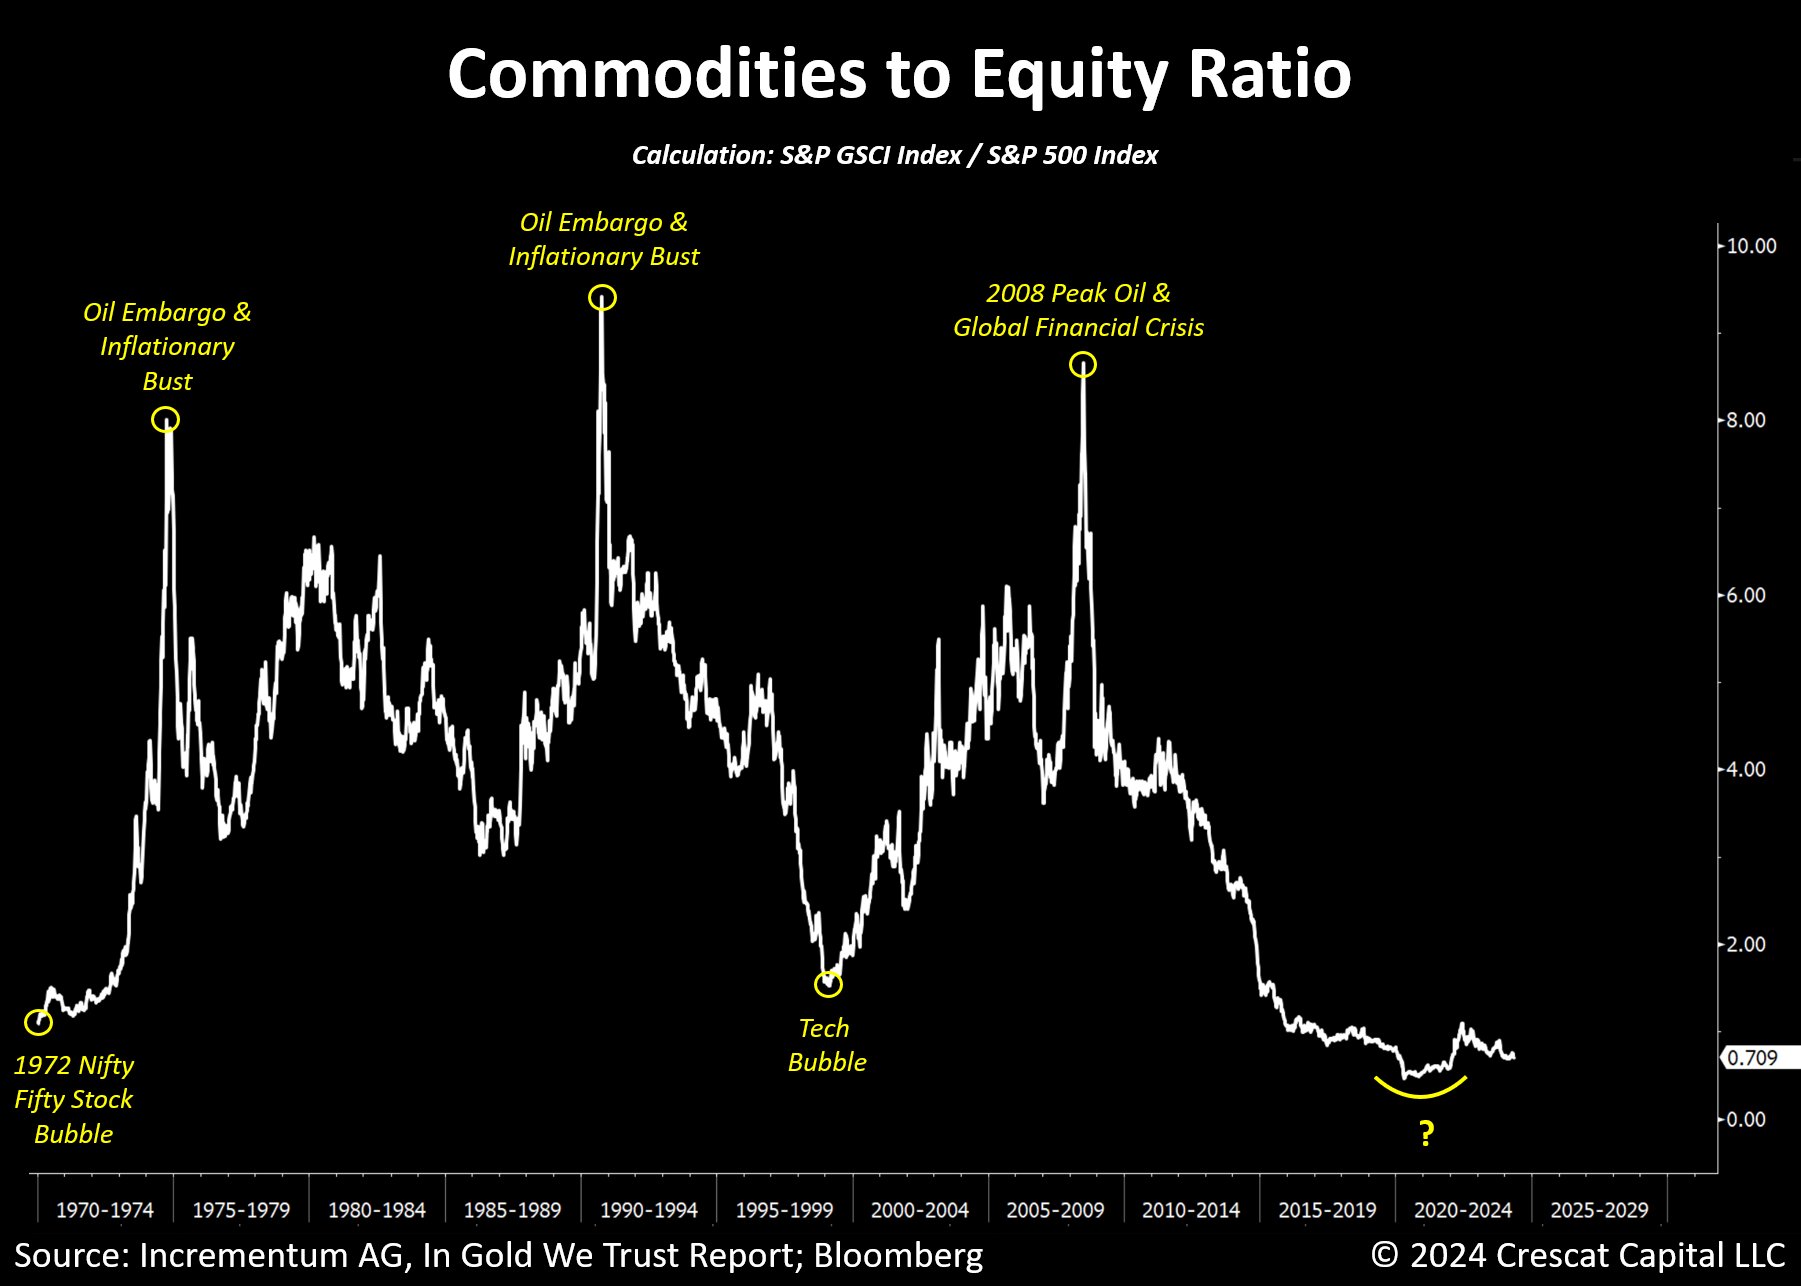 Commodities to Equity Ratio